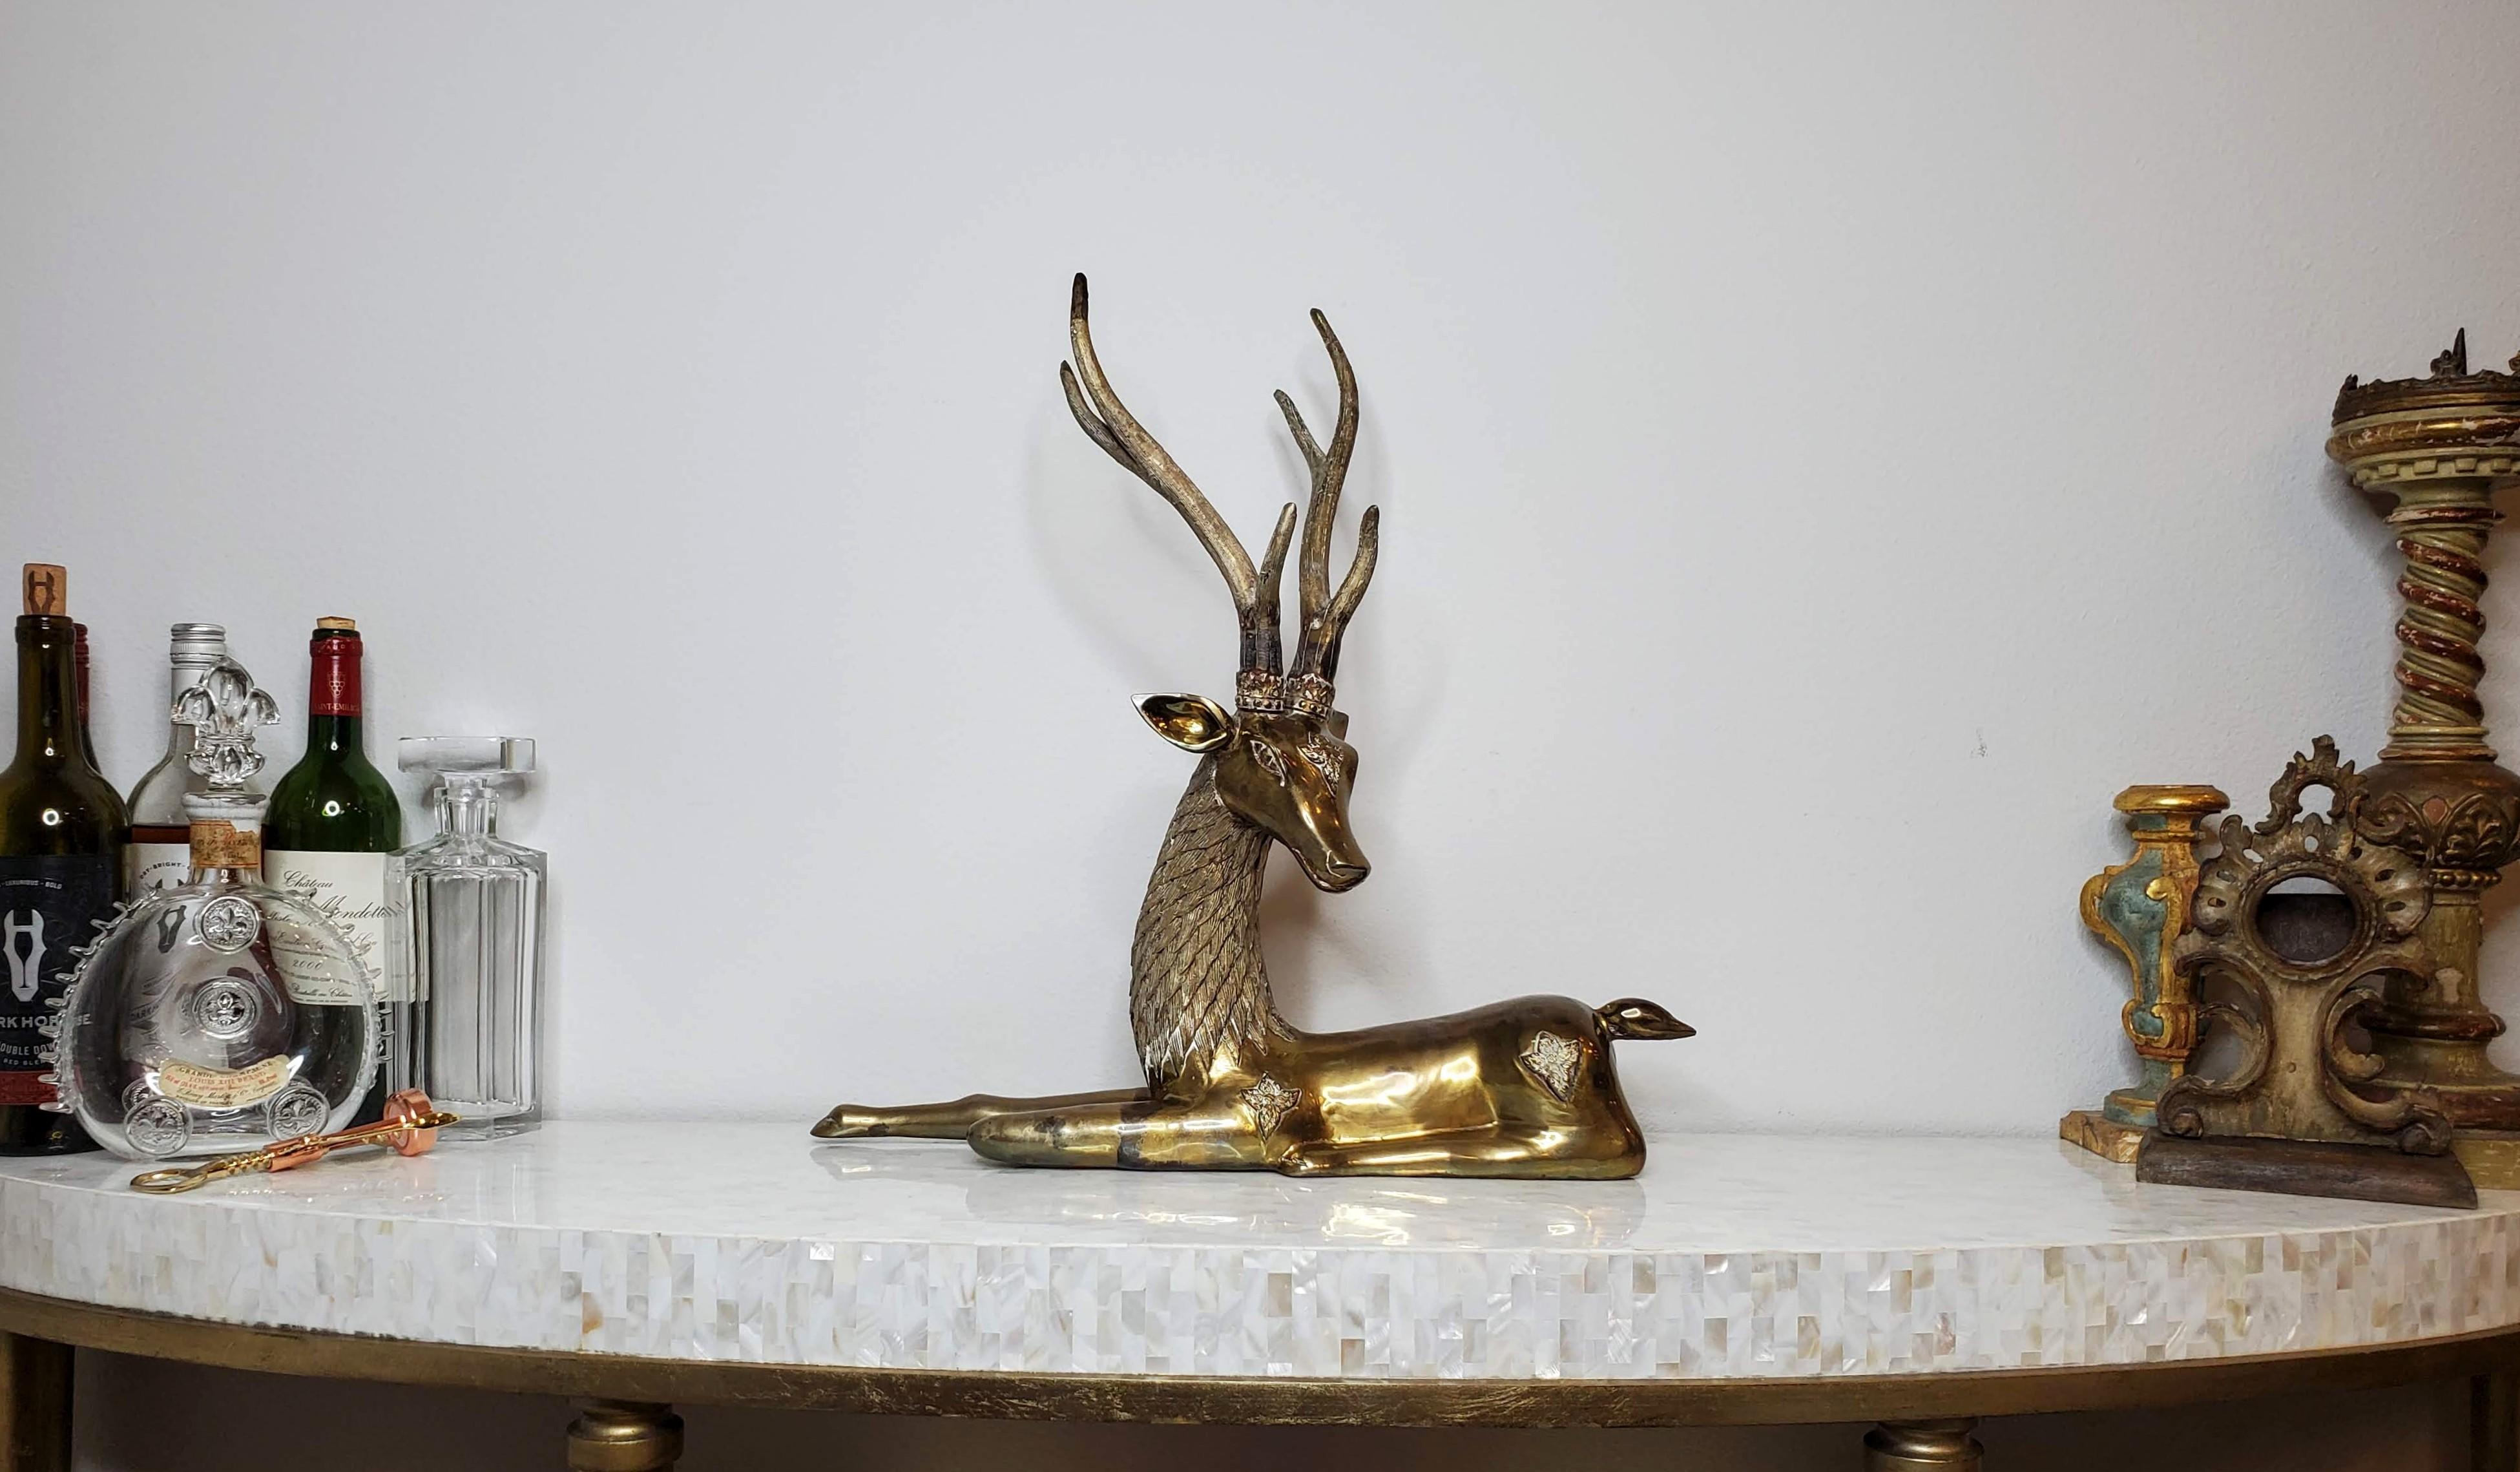 A stunning, rare, very fine quality early Sarreid polished brass stag with beautifully aged patina! 

The scarce huge Mid-century Modern - Hollywood Regency naturalistic deer with charming whimsical elements has a truly luxurious presence that's